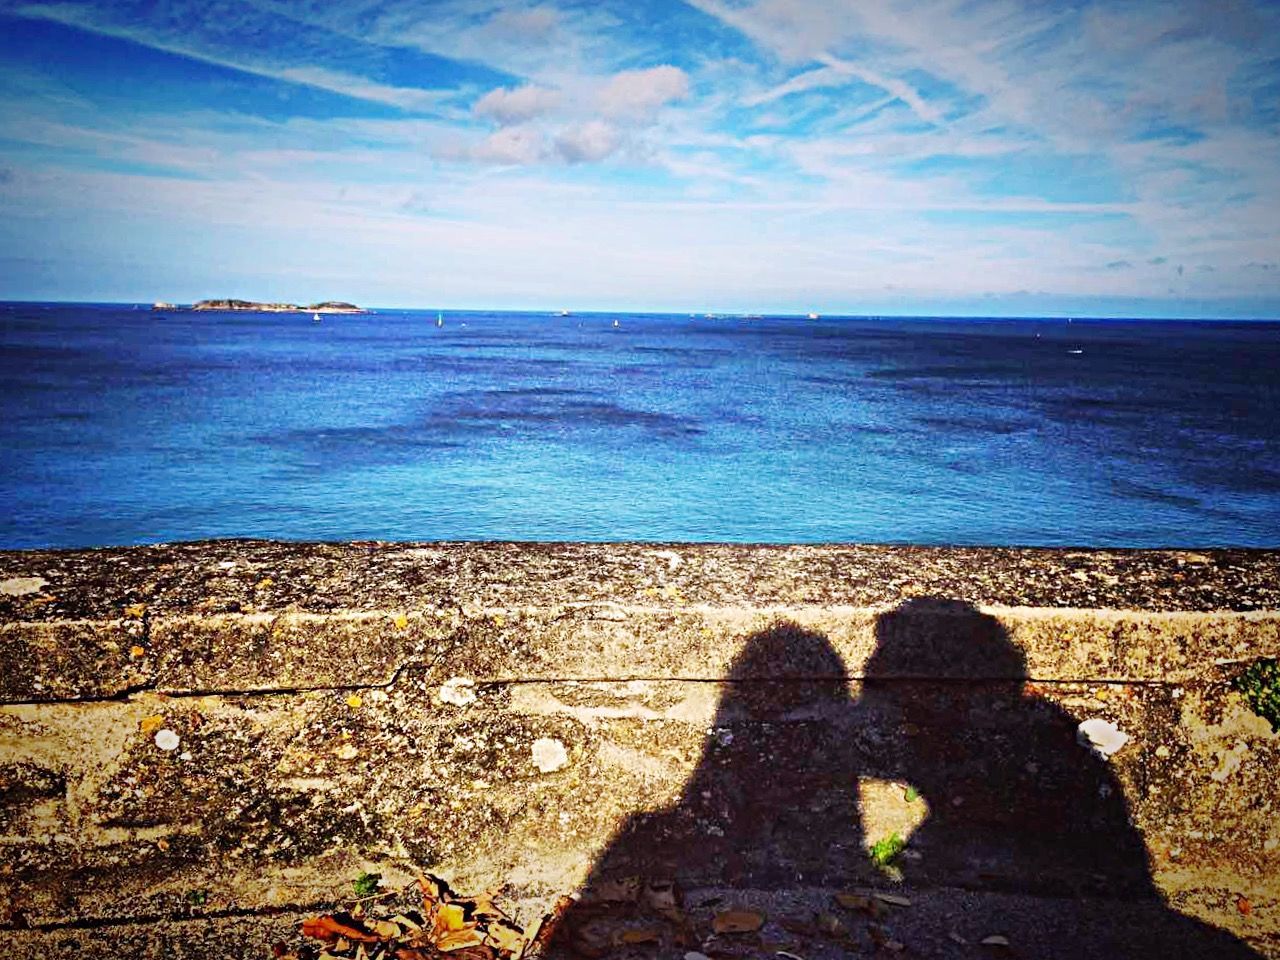 Shadow of man and woman on retaining wall by sea against sky